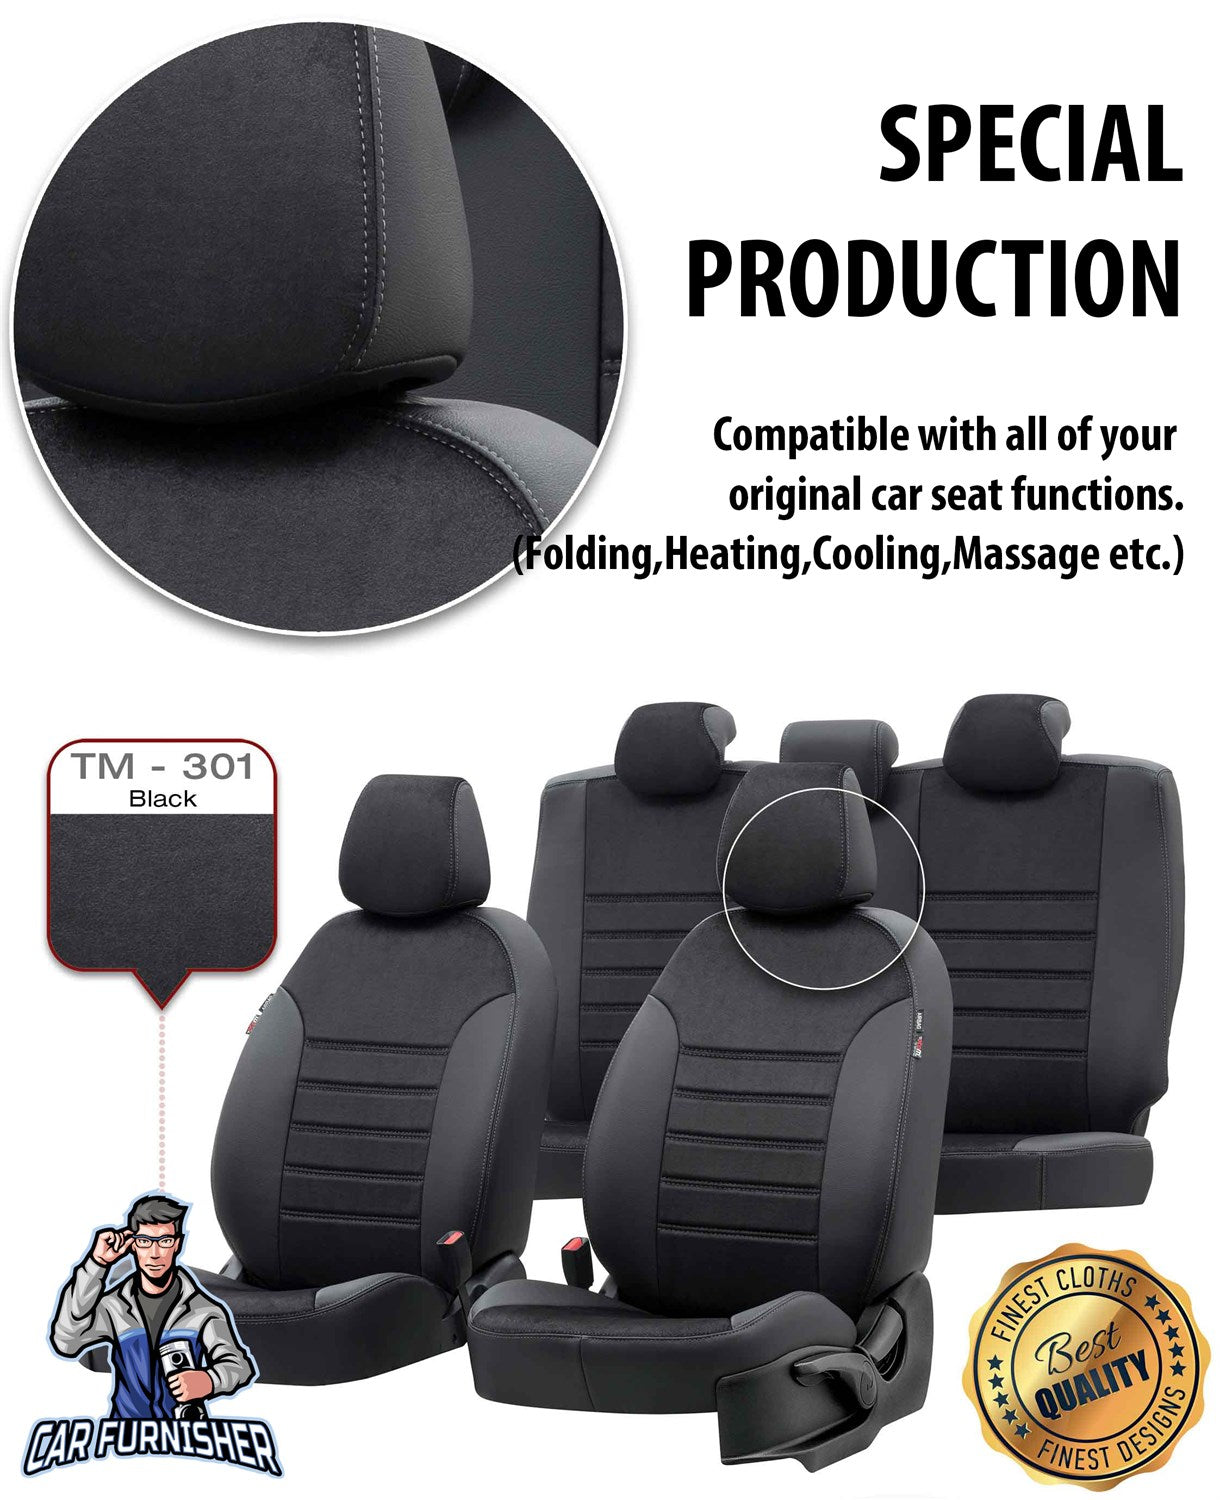 VW Scirocco Car Seat Cover 2008-2017 Milano Design Smoked Black Full Set (5 Seats + Handrest) Leather & Fabric